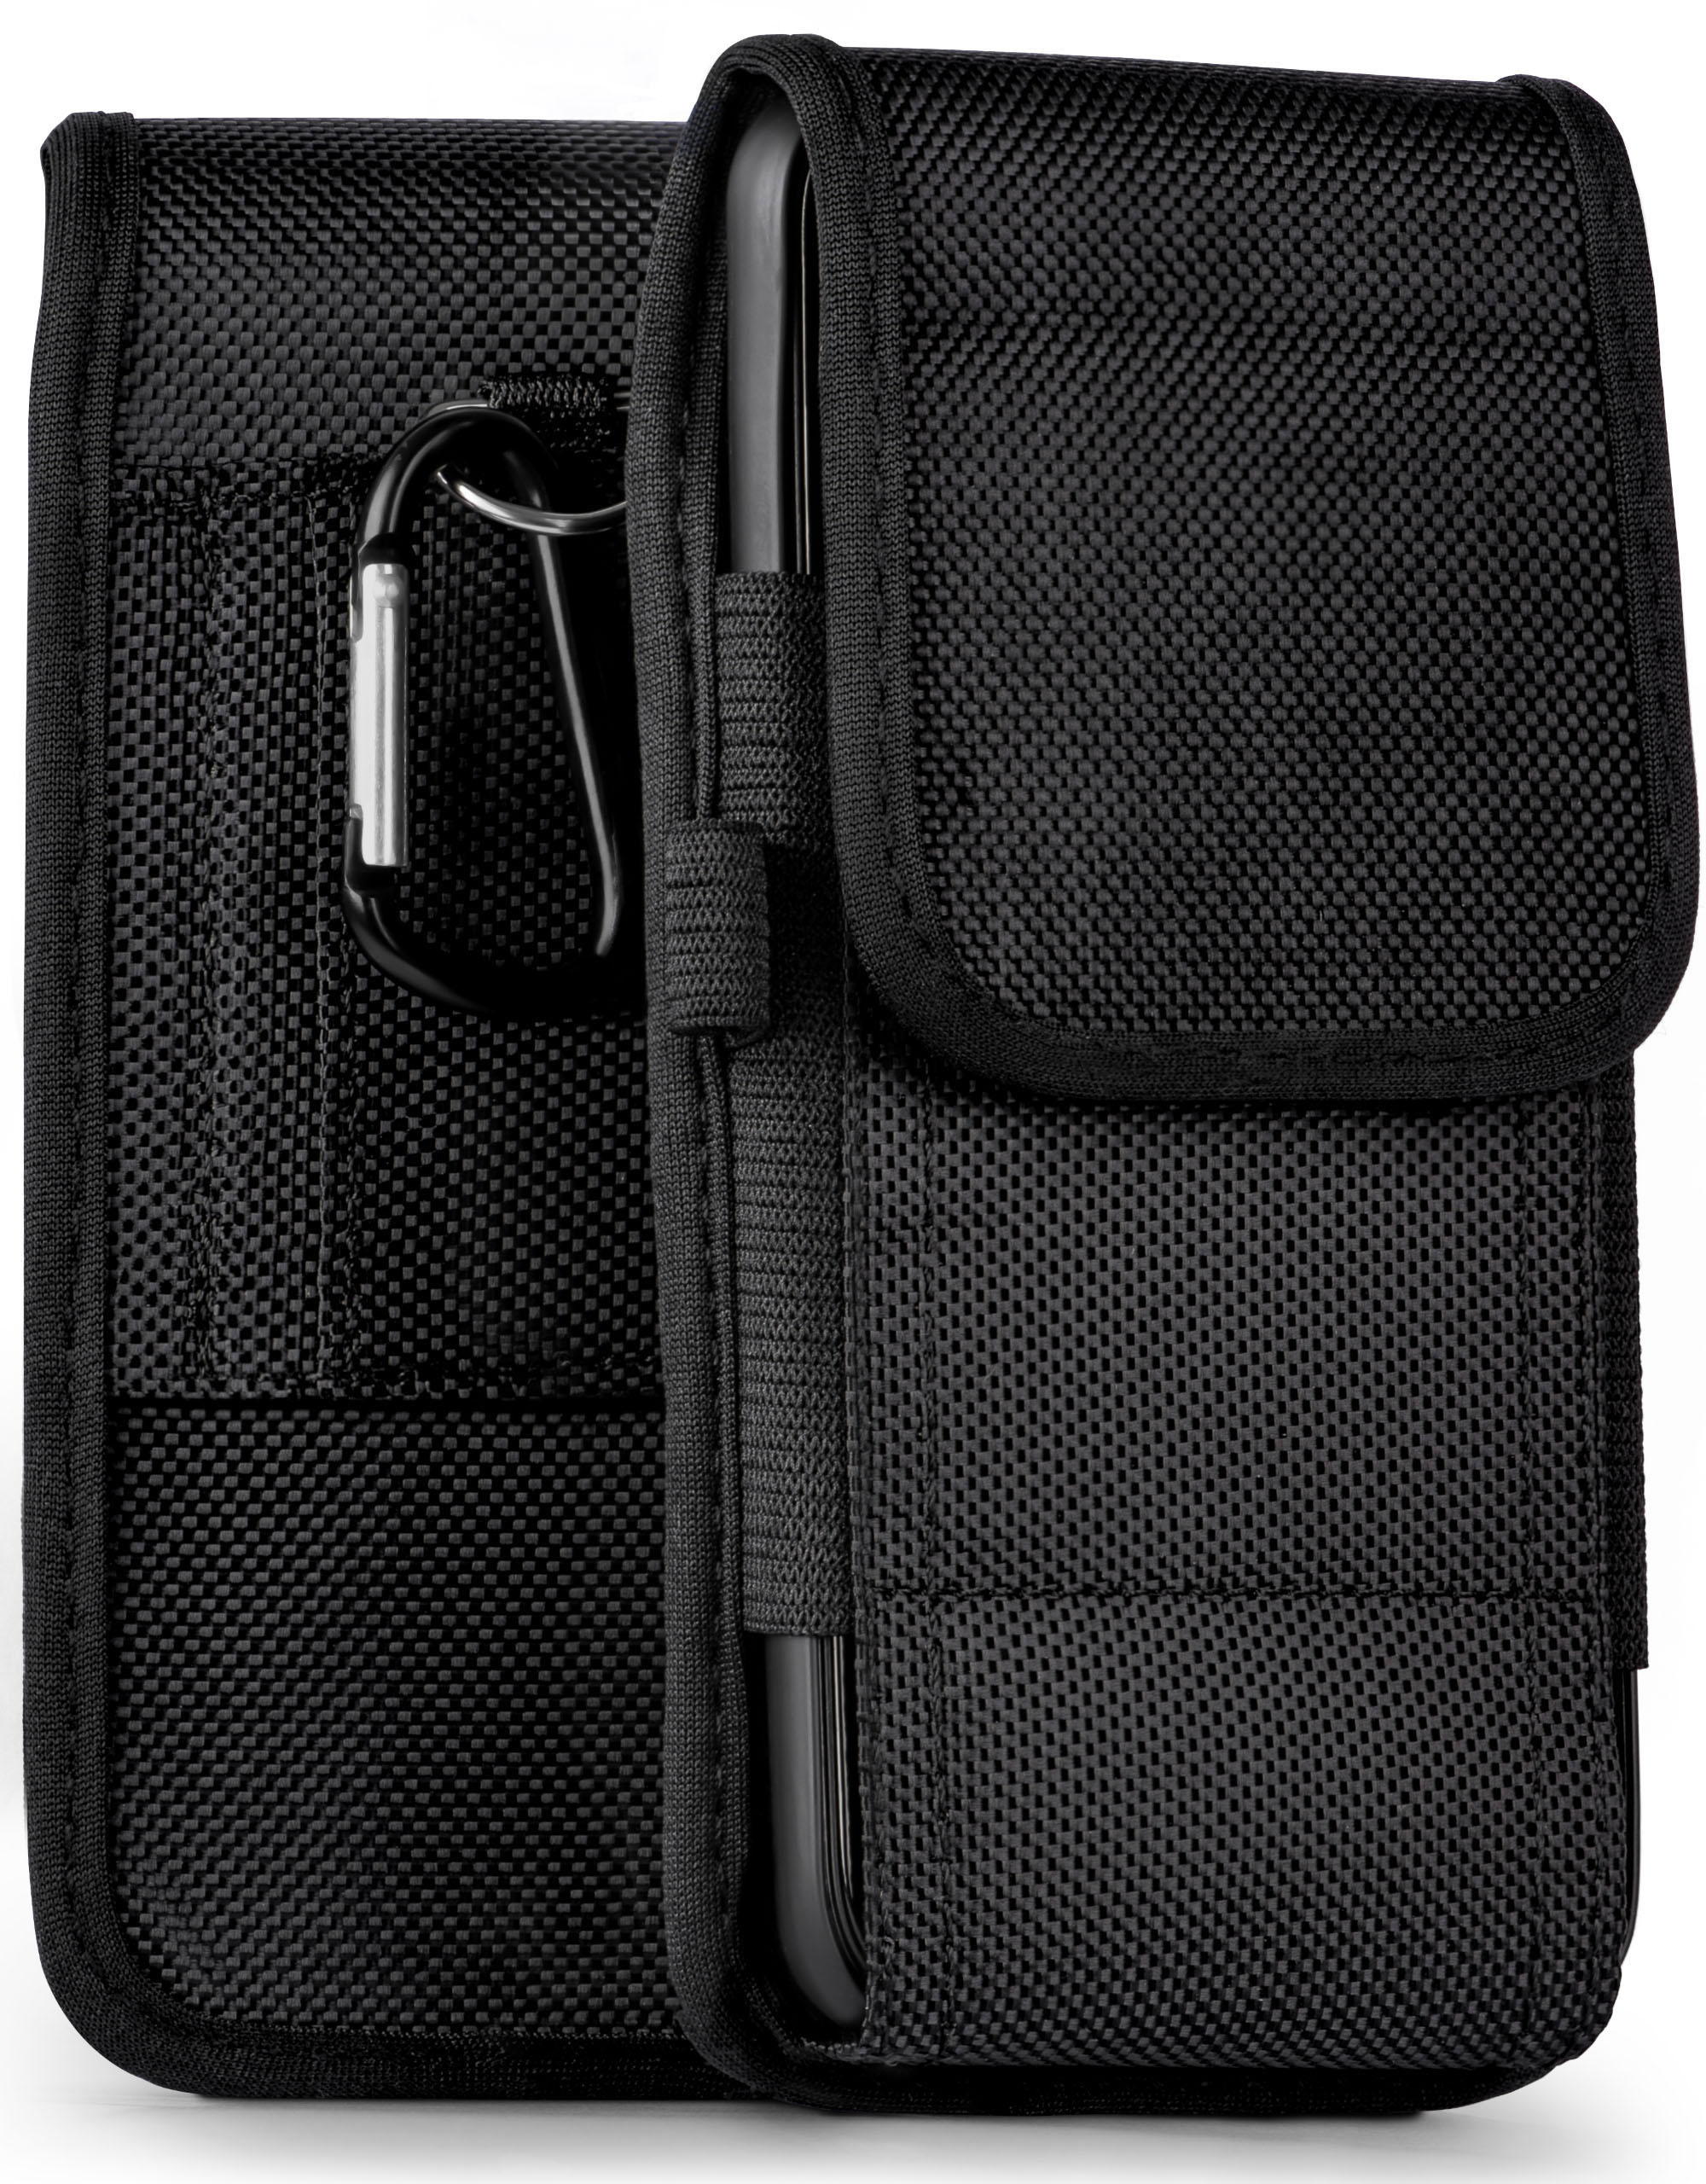 Agility 5.4, Case, Trail Nokia, Holster, MOEX